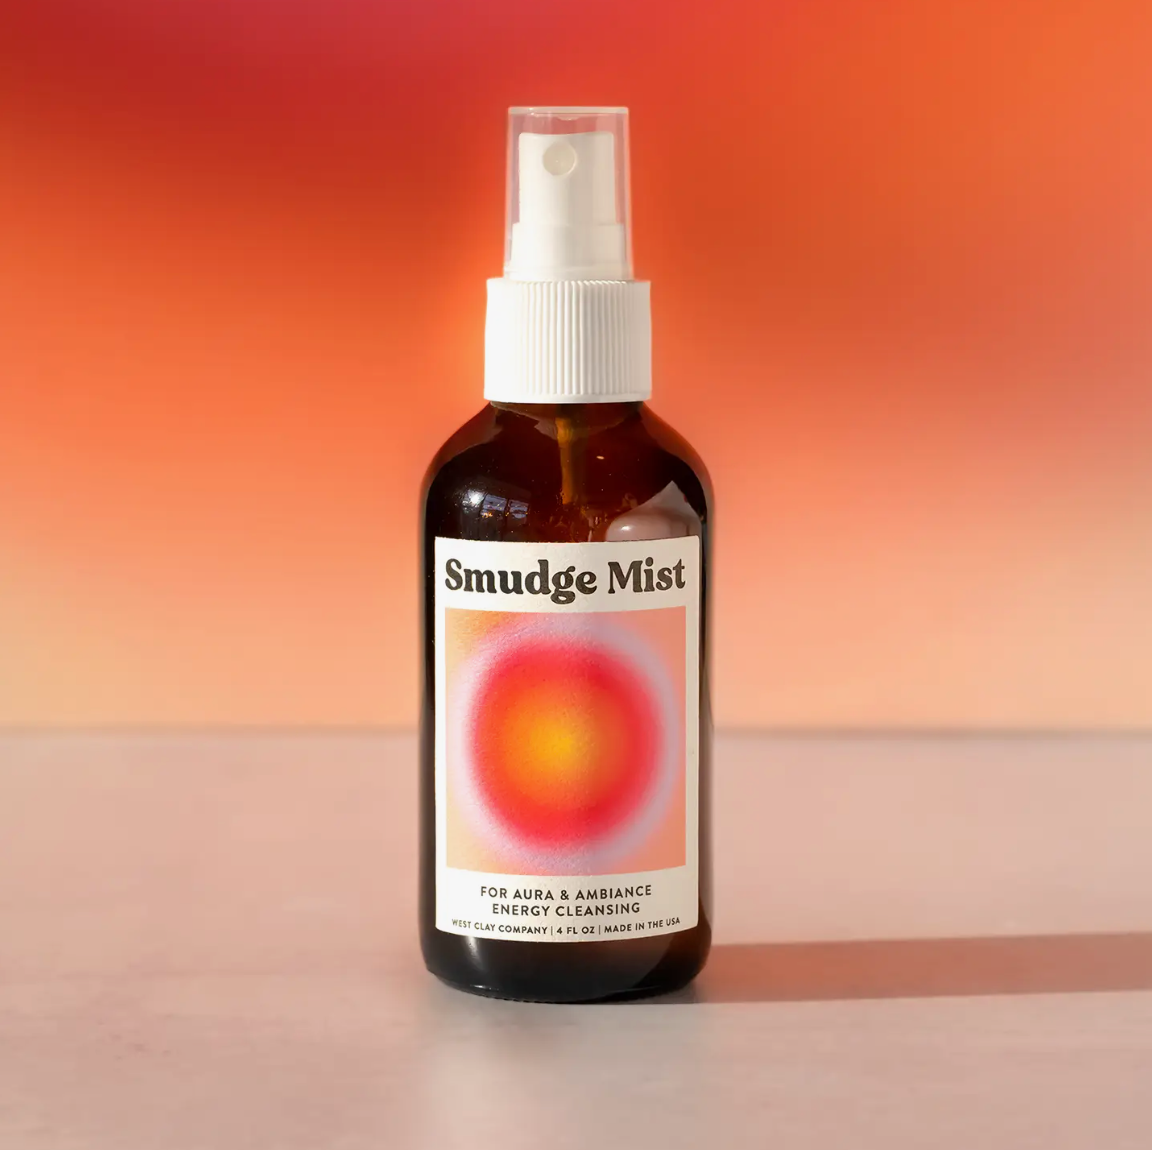 Smudge Mist for Aura & Ambiance Energy Cleansing